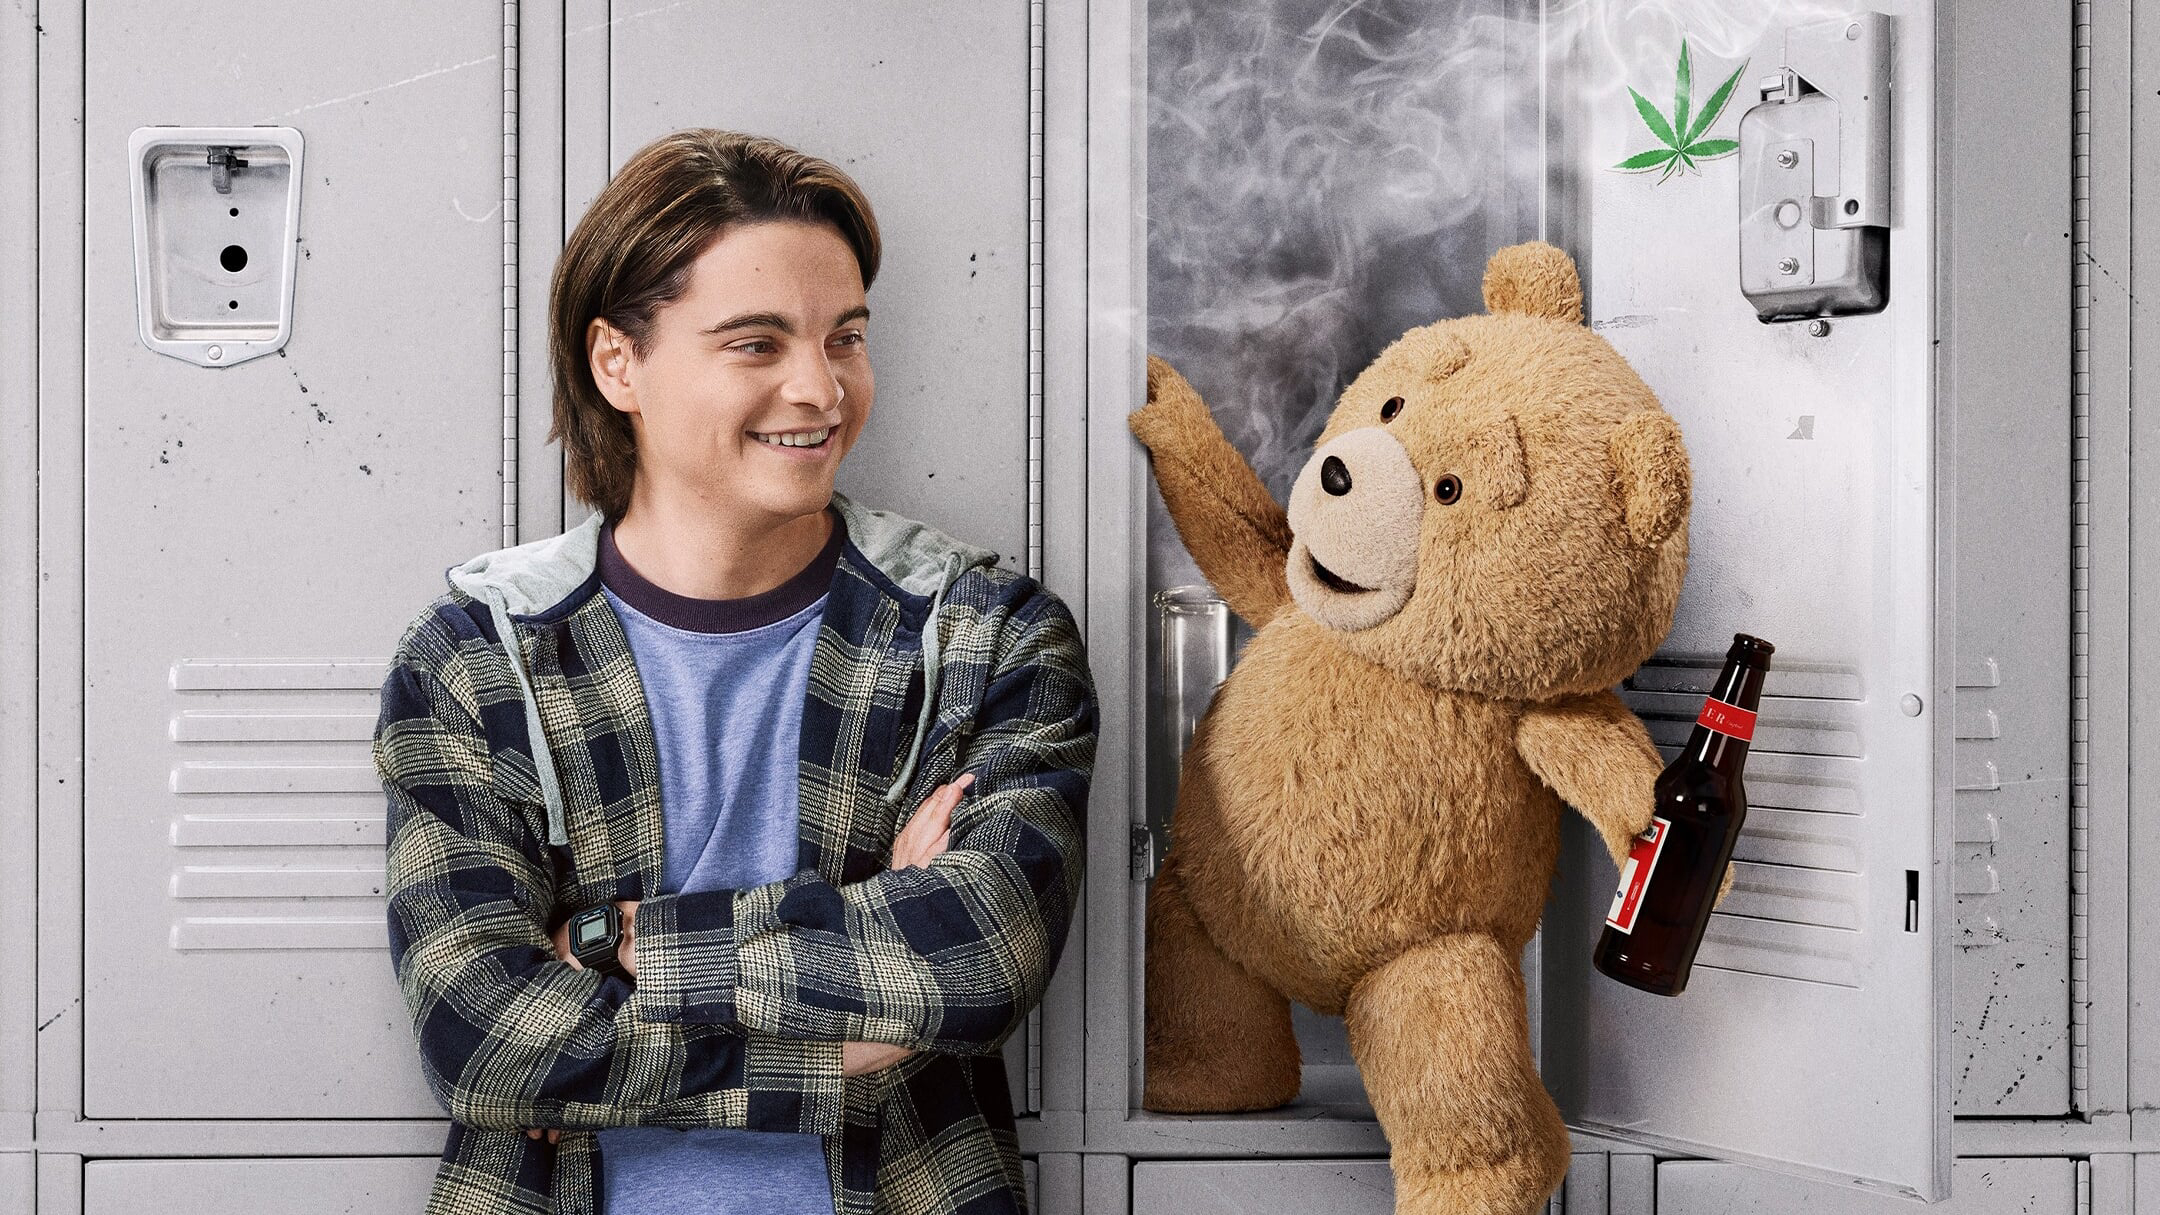 Ted - Ted (2024)